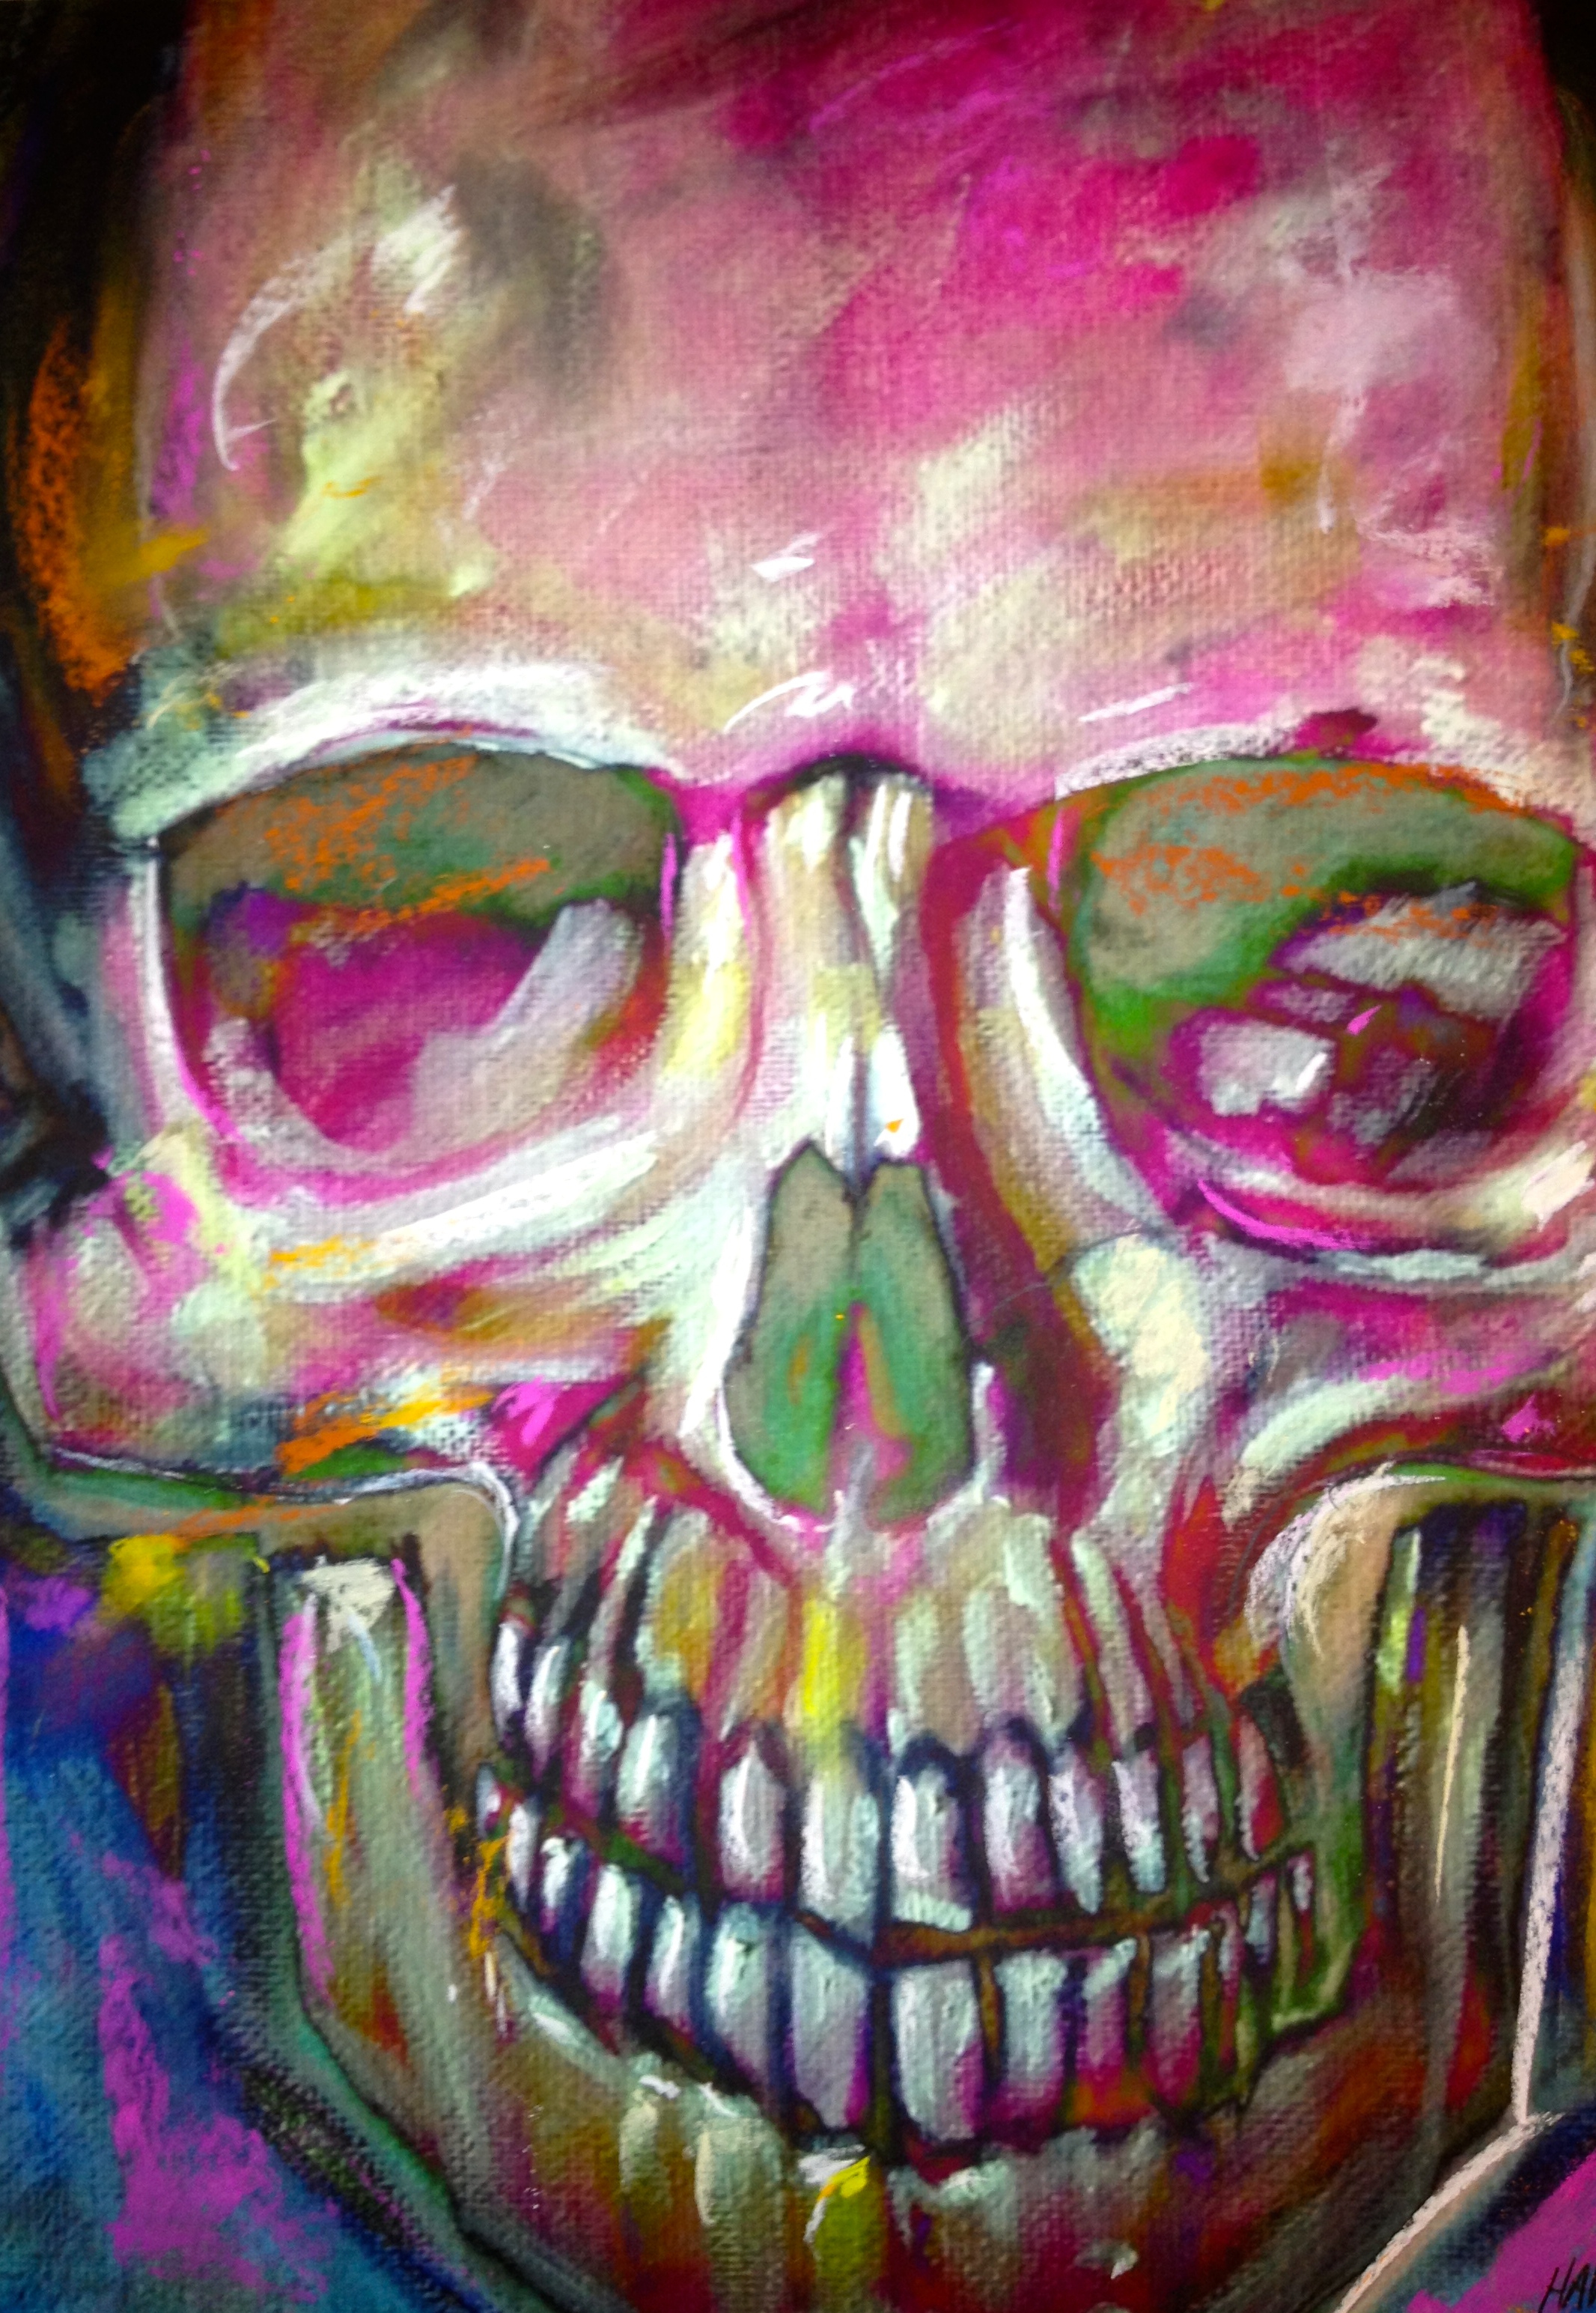 "laughing at mortality" by Eric Hawkey